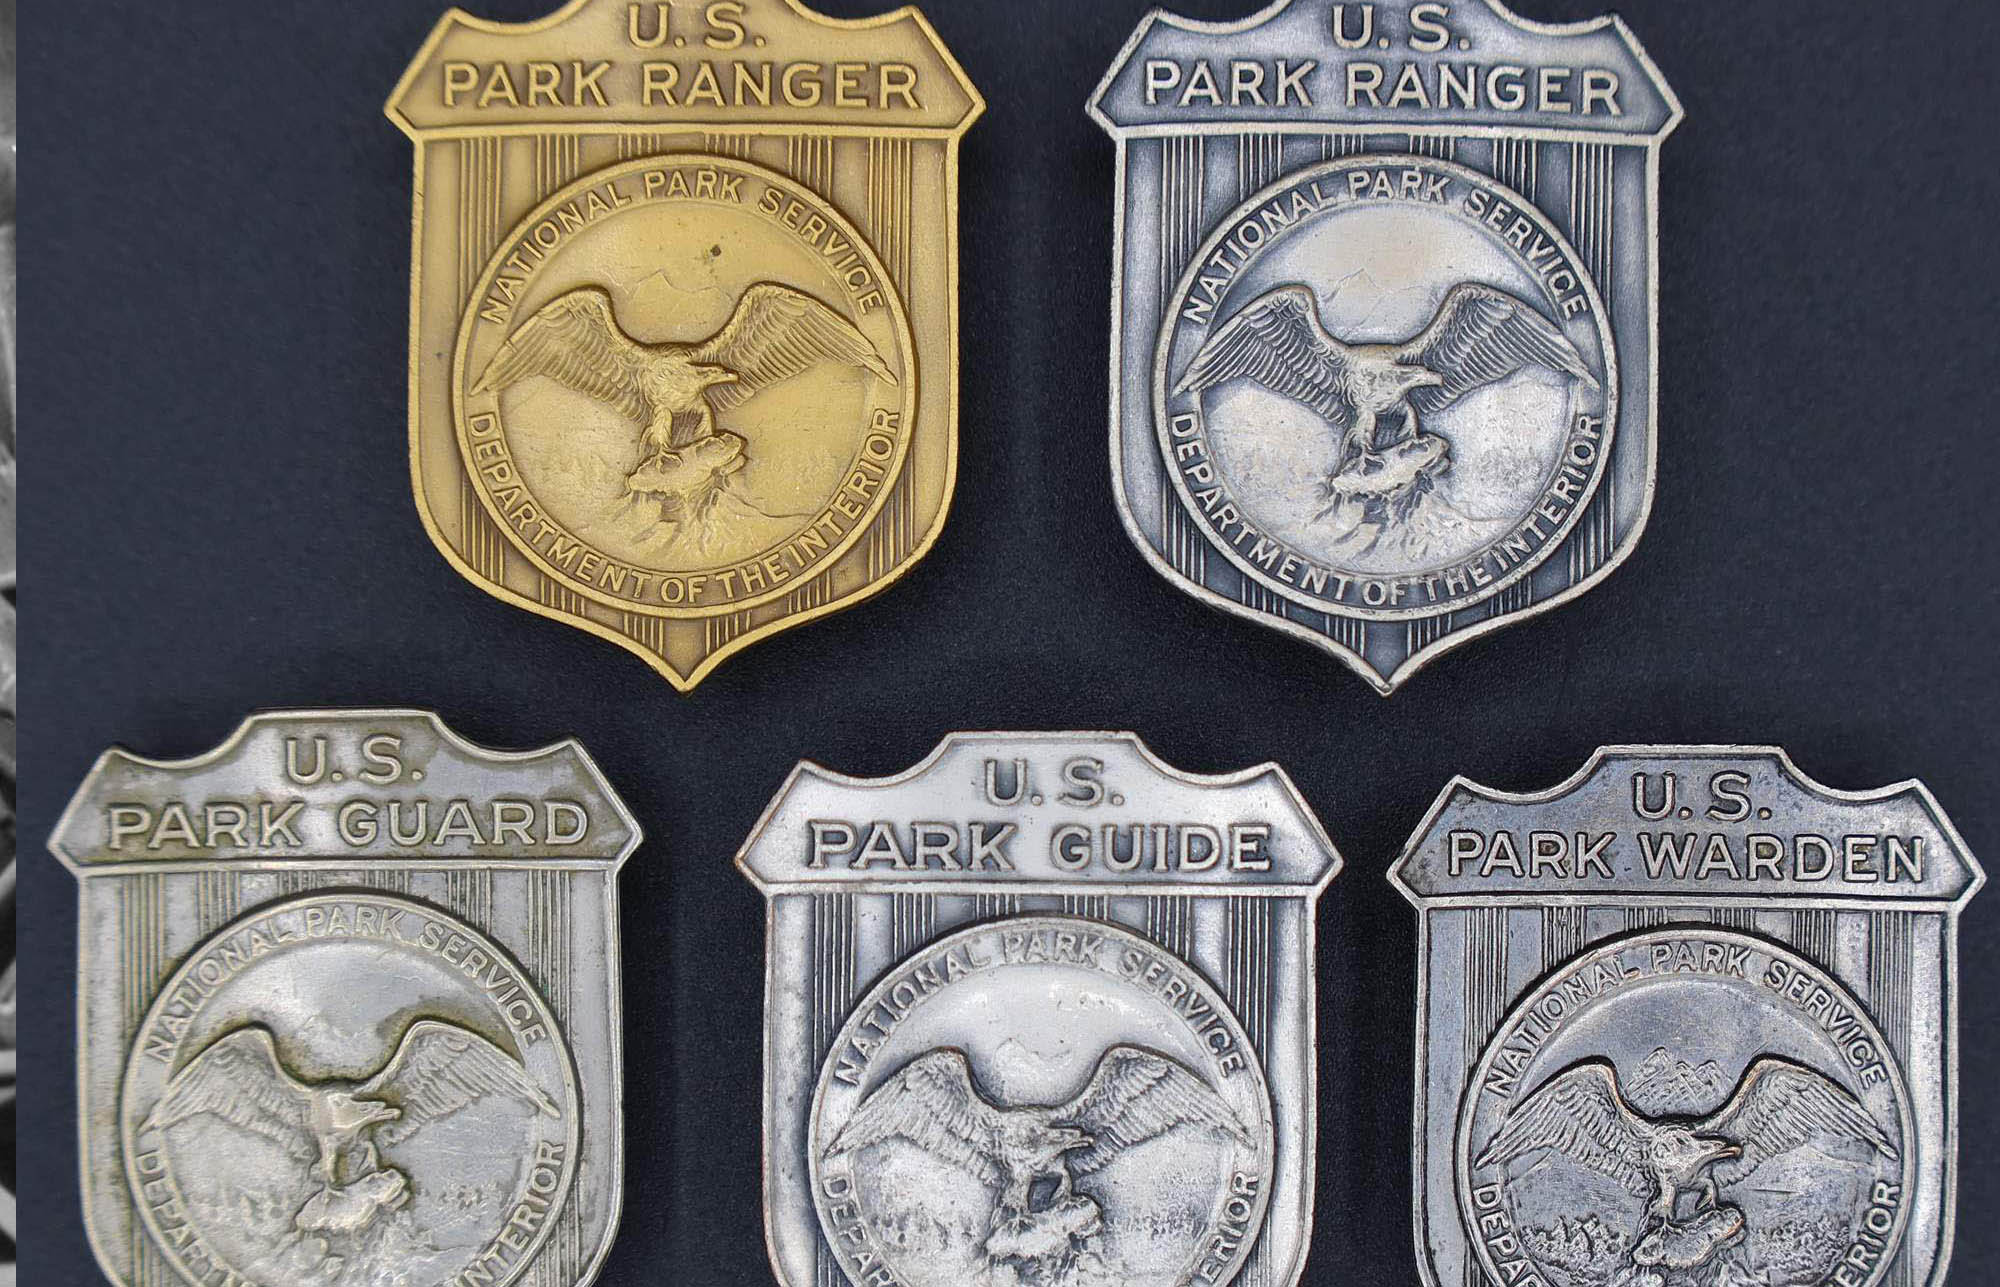 Shield-shaped badges with left facing eagle in the middle. Gold and silver marked U.S. Park Ranger, others marked U.S. Park Guide, U.S. Park Guard, and U.S. Park Warden.